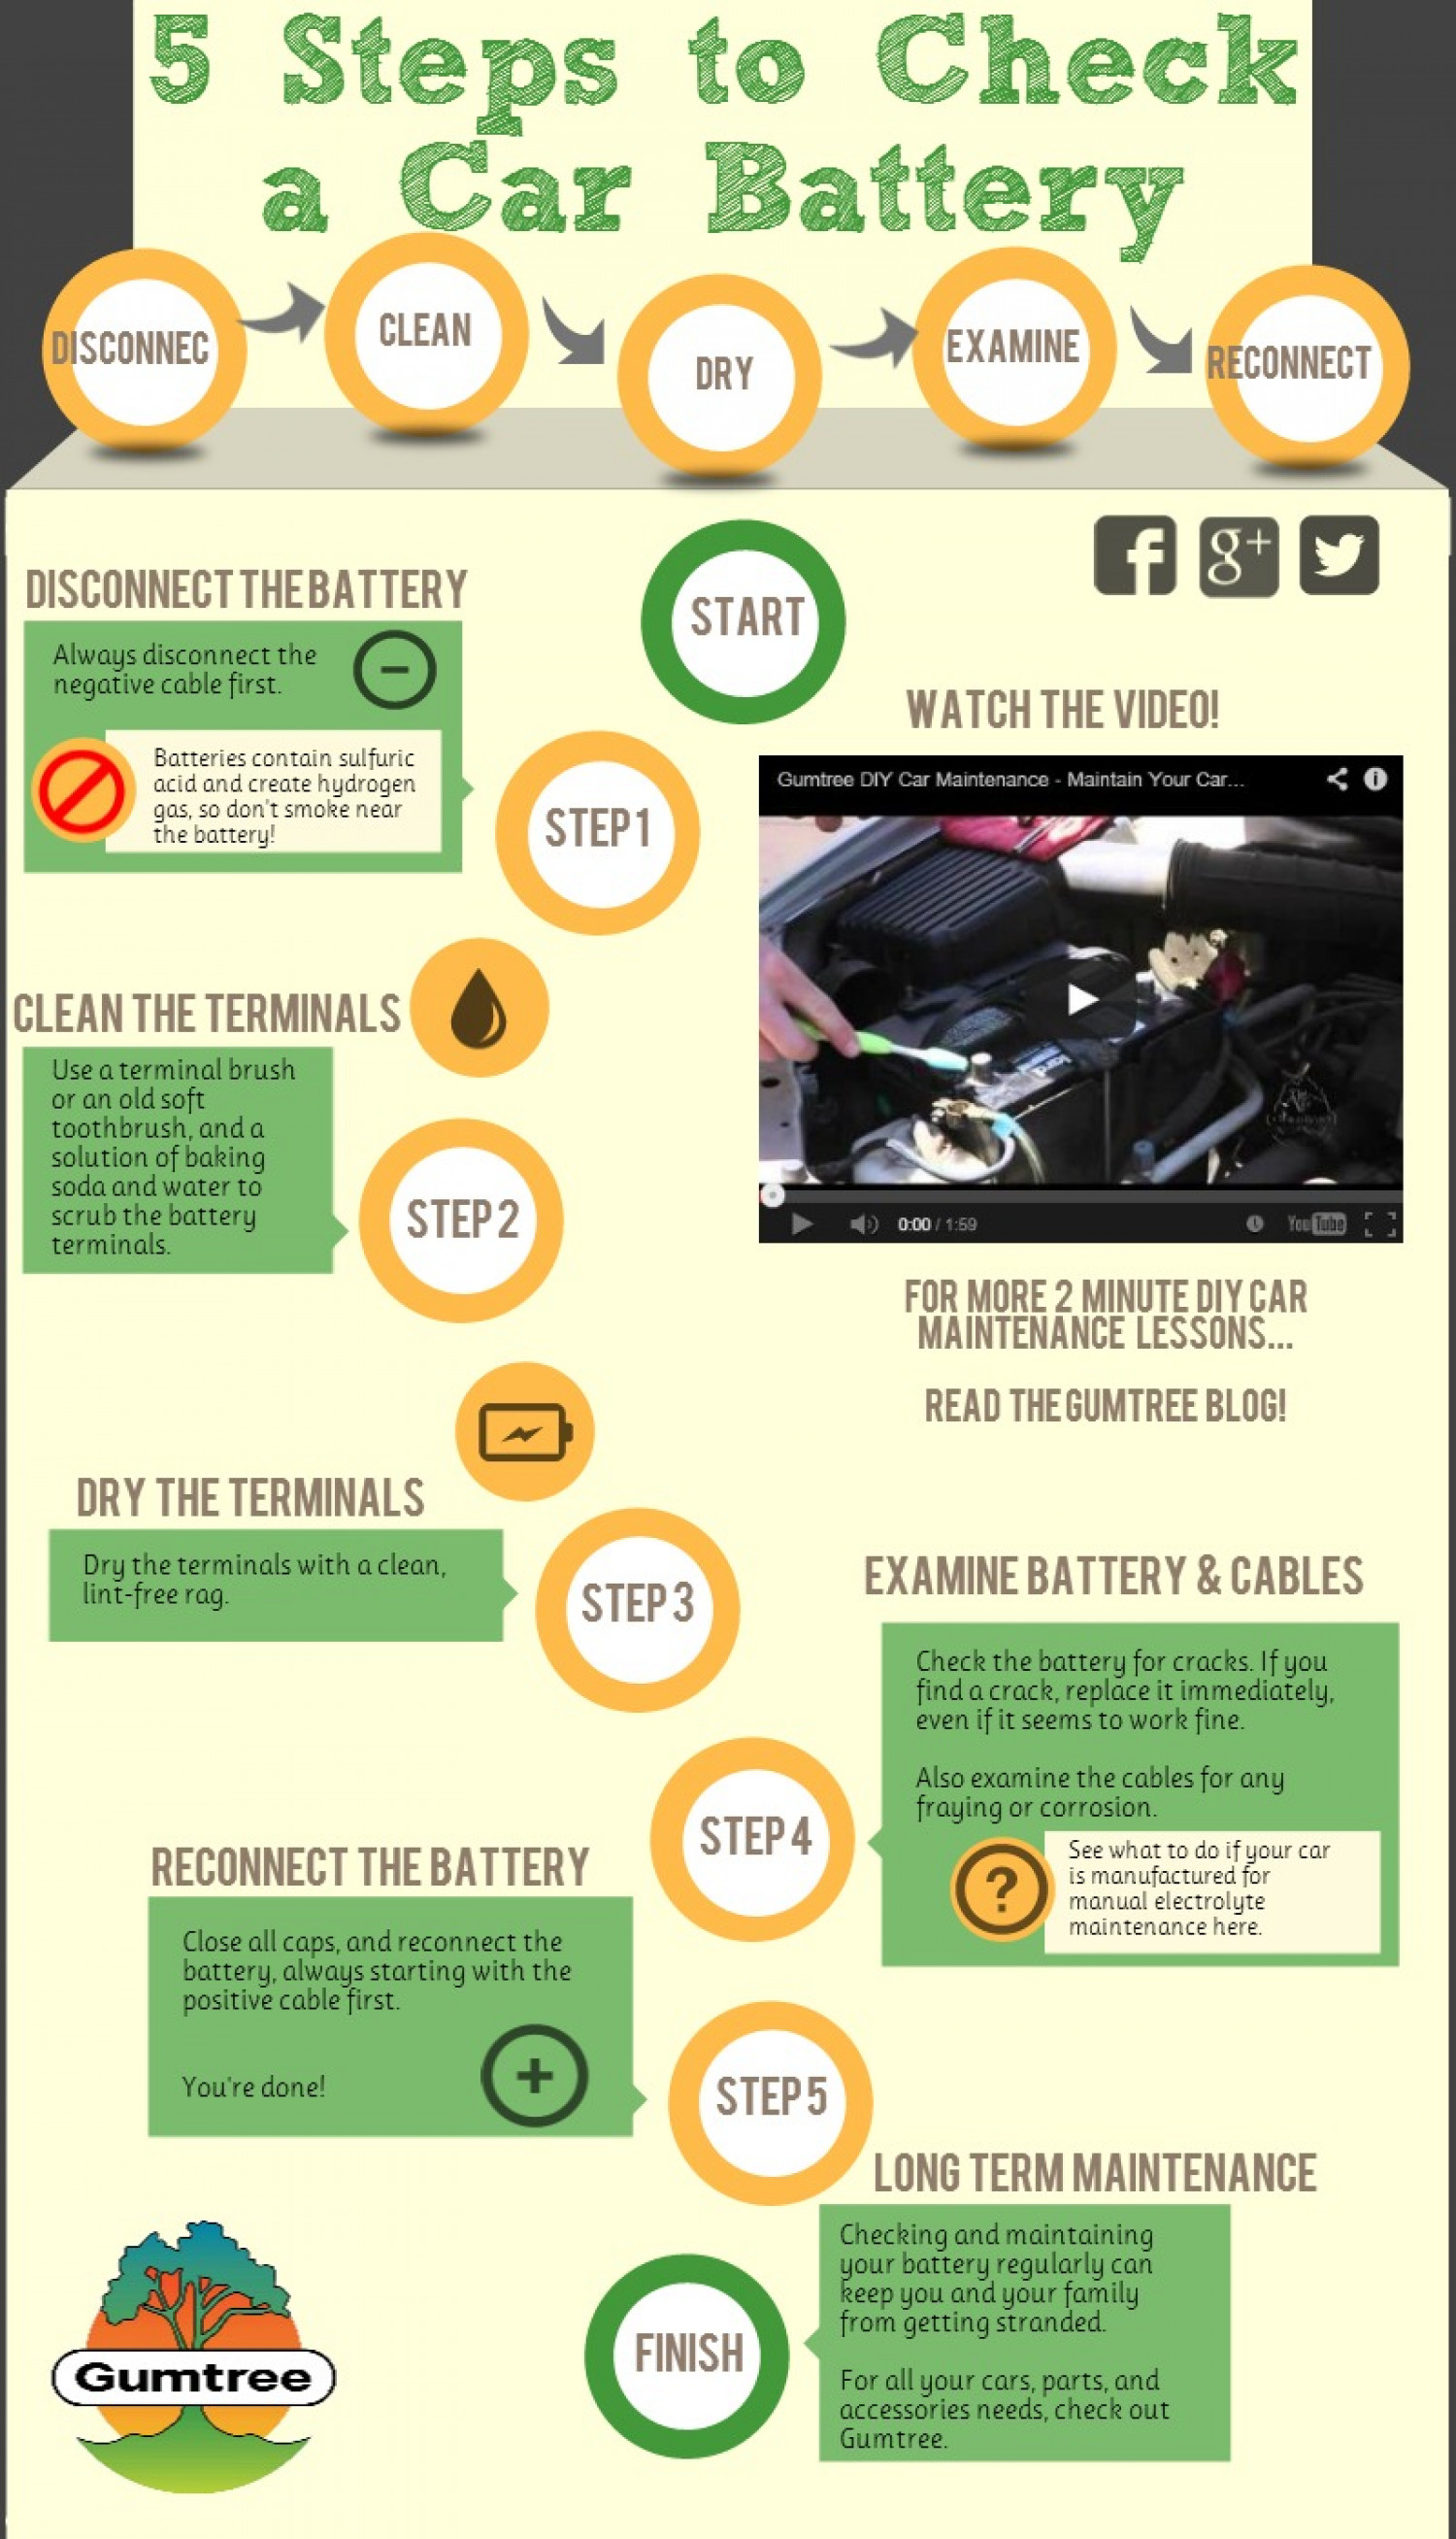 5 Steps to Check a Car Battery Infographic